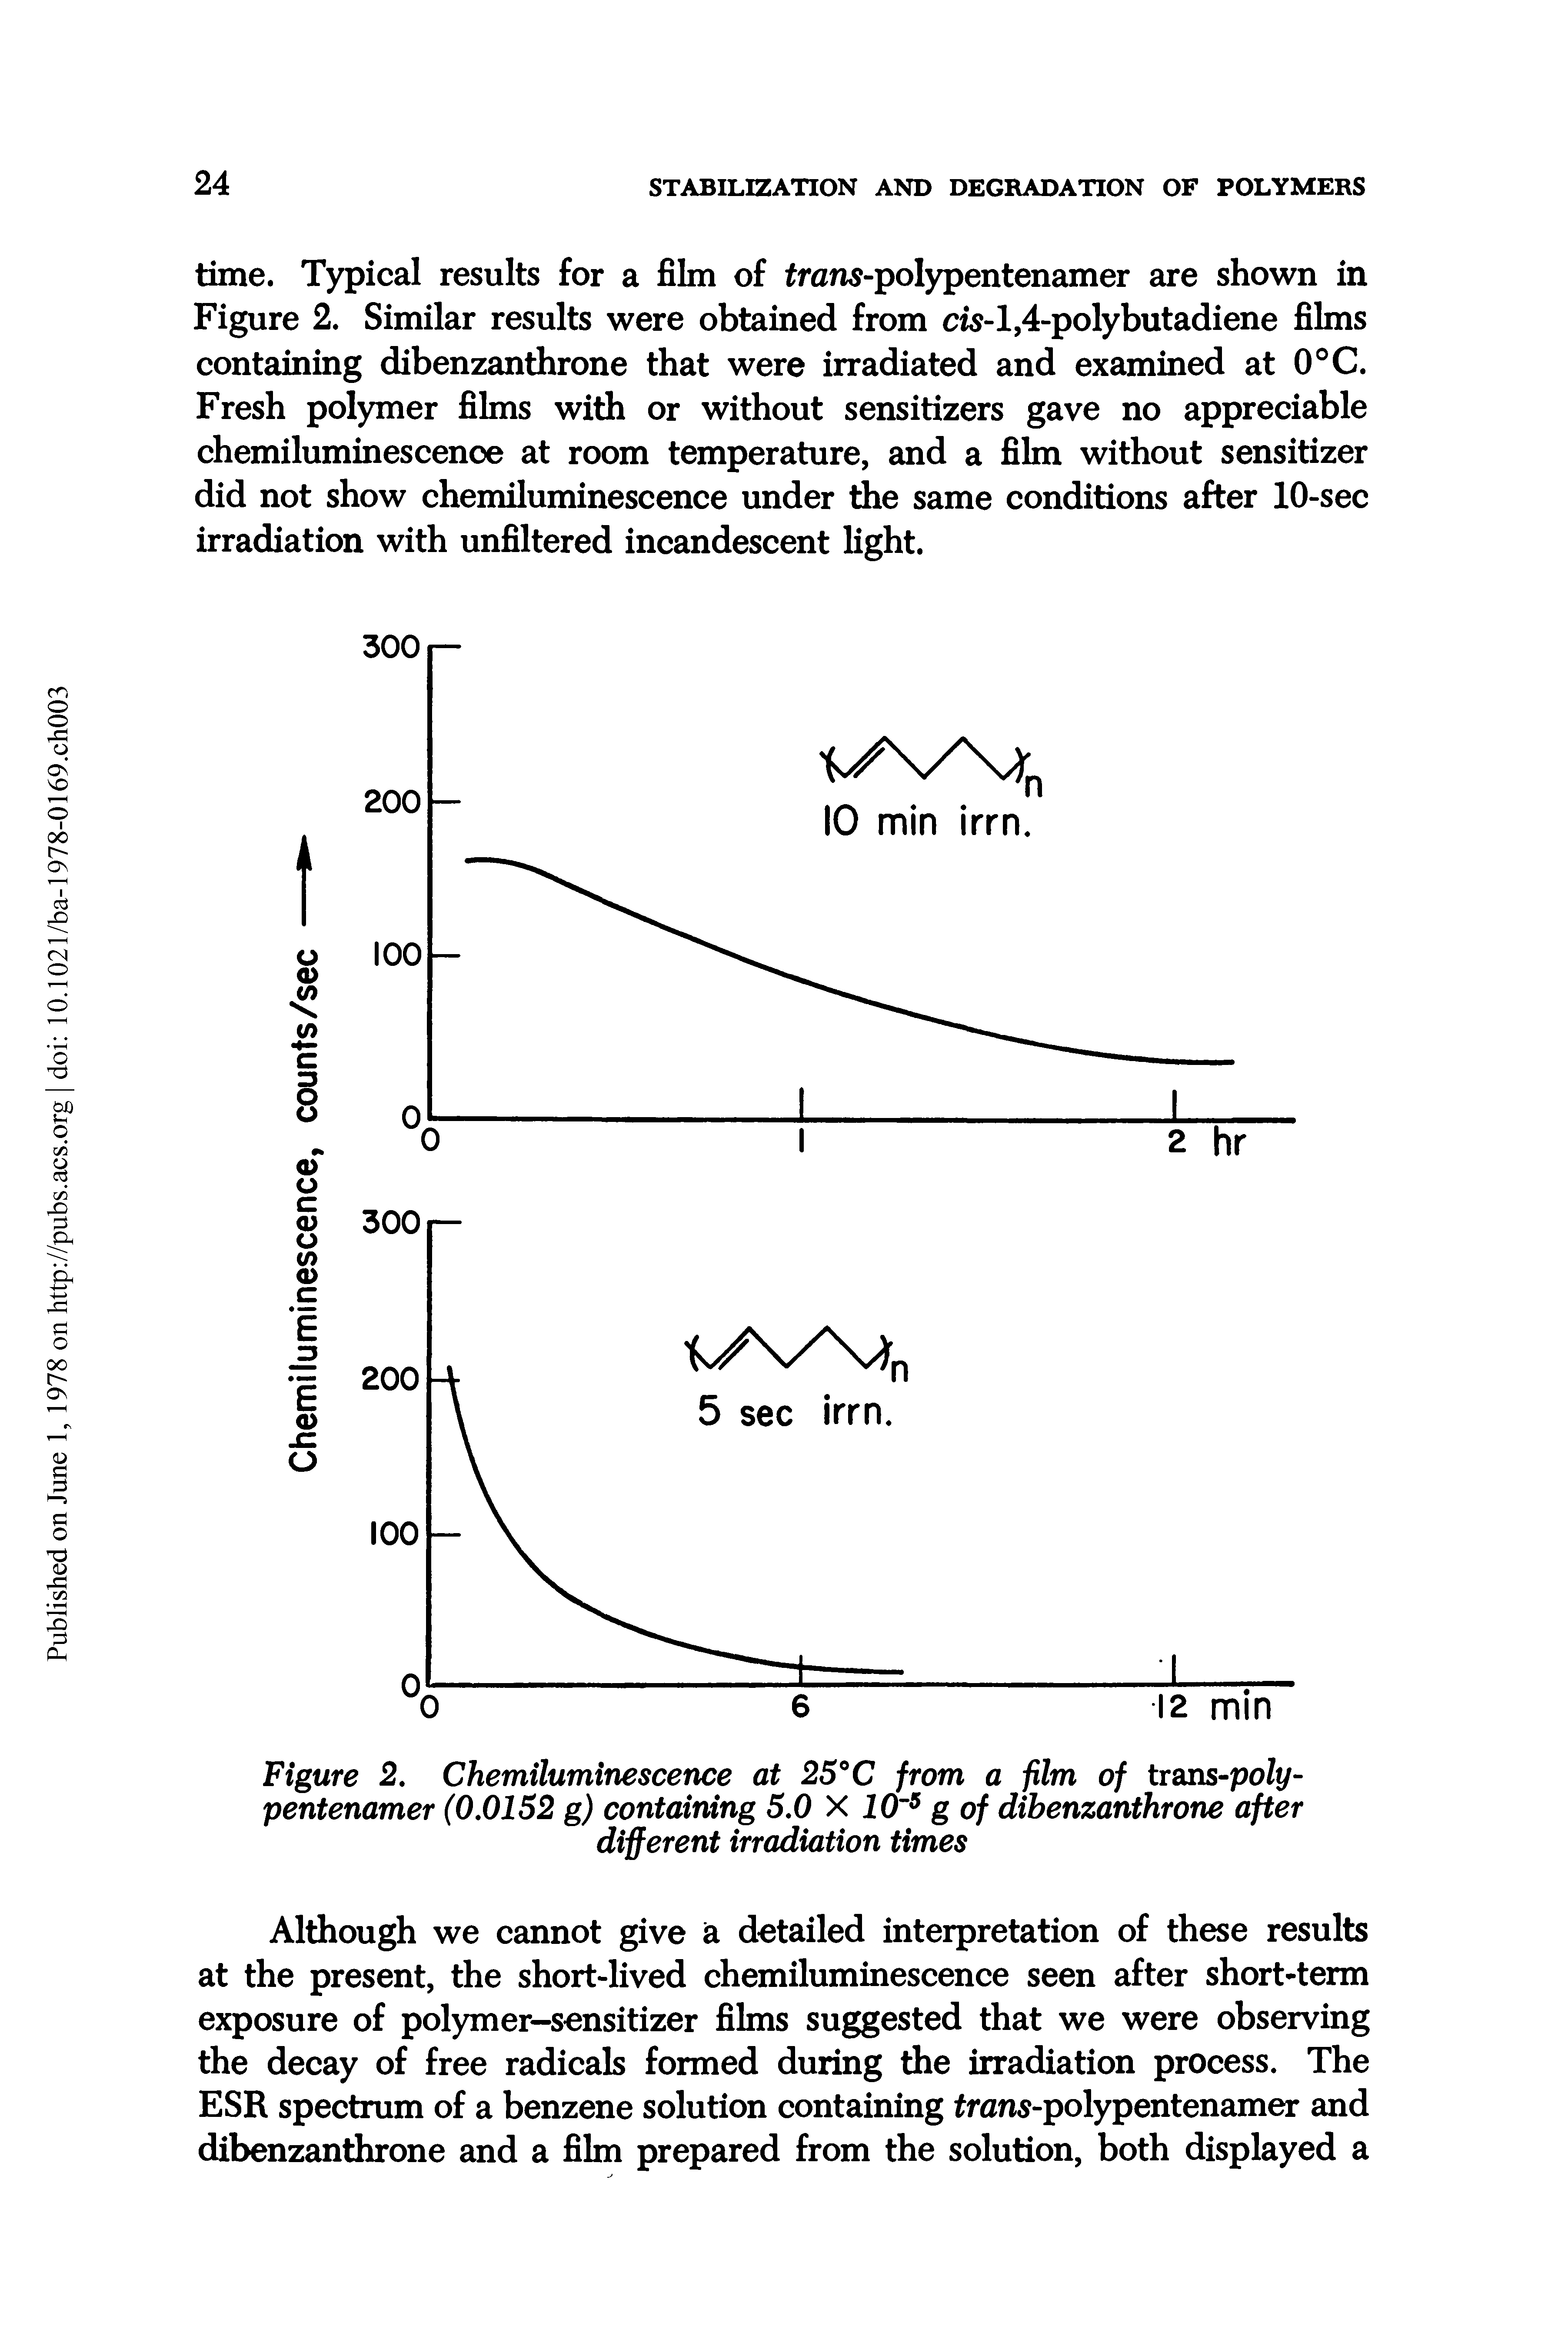 Figure 2. Chemiluminescence at 25°C from a film of trans-poly-pentenamer (0.0152 g) containing 5.0 X I O 5 g of dibenzanthrone after different irradiation times...